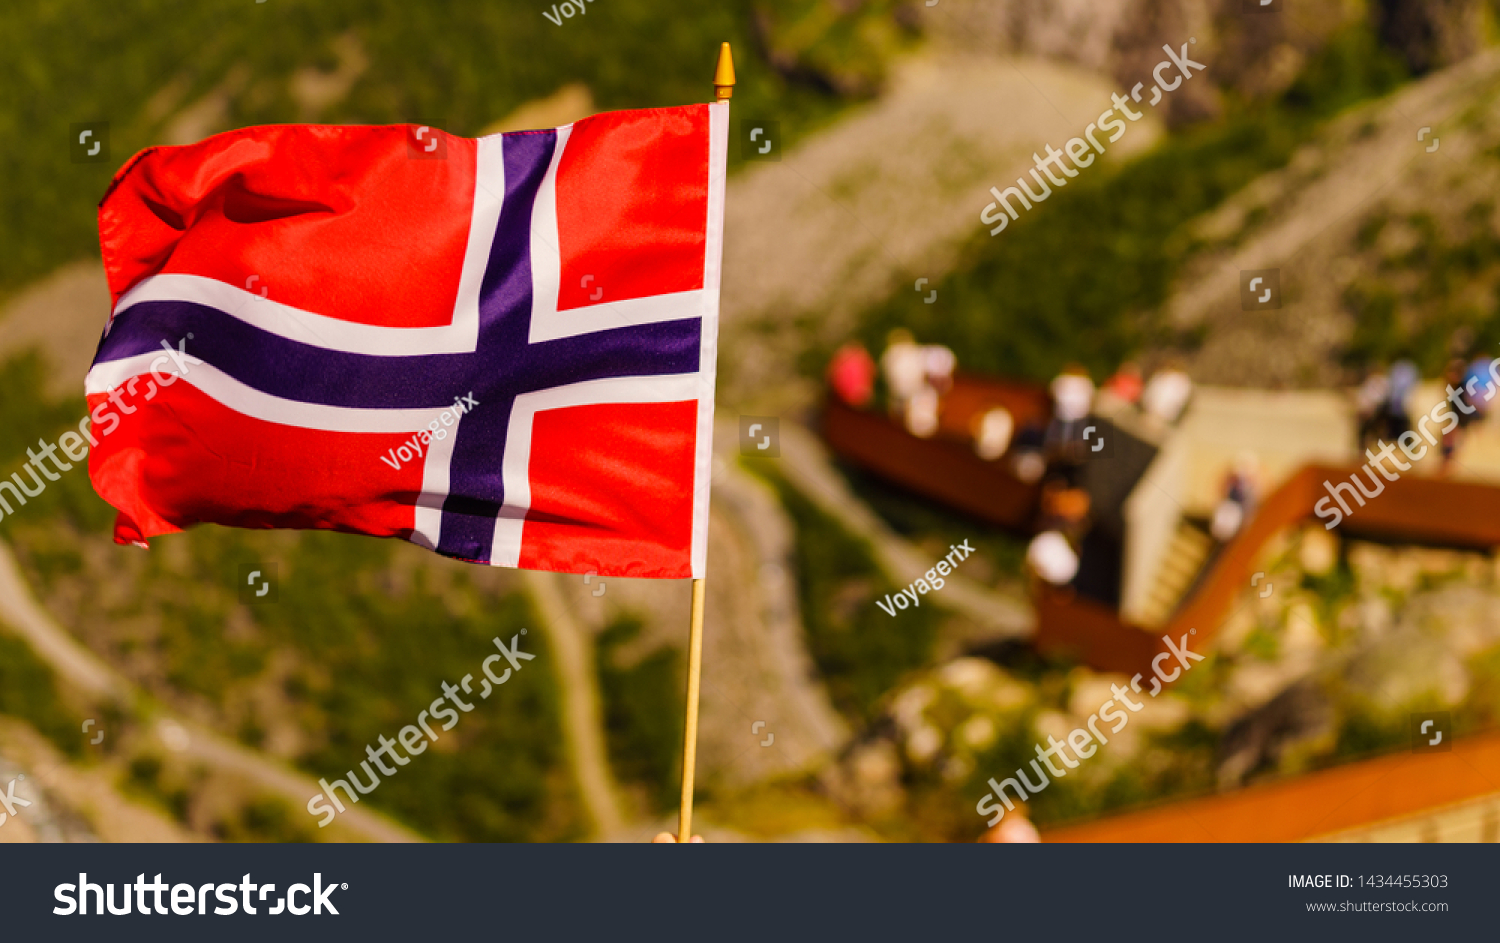 Trollstigen mountain road landscape in Norway, Europe. Norwegian flag waving and many tourists people on viewing platform in background. National tourist route. #1434455303